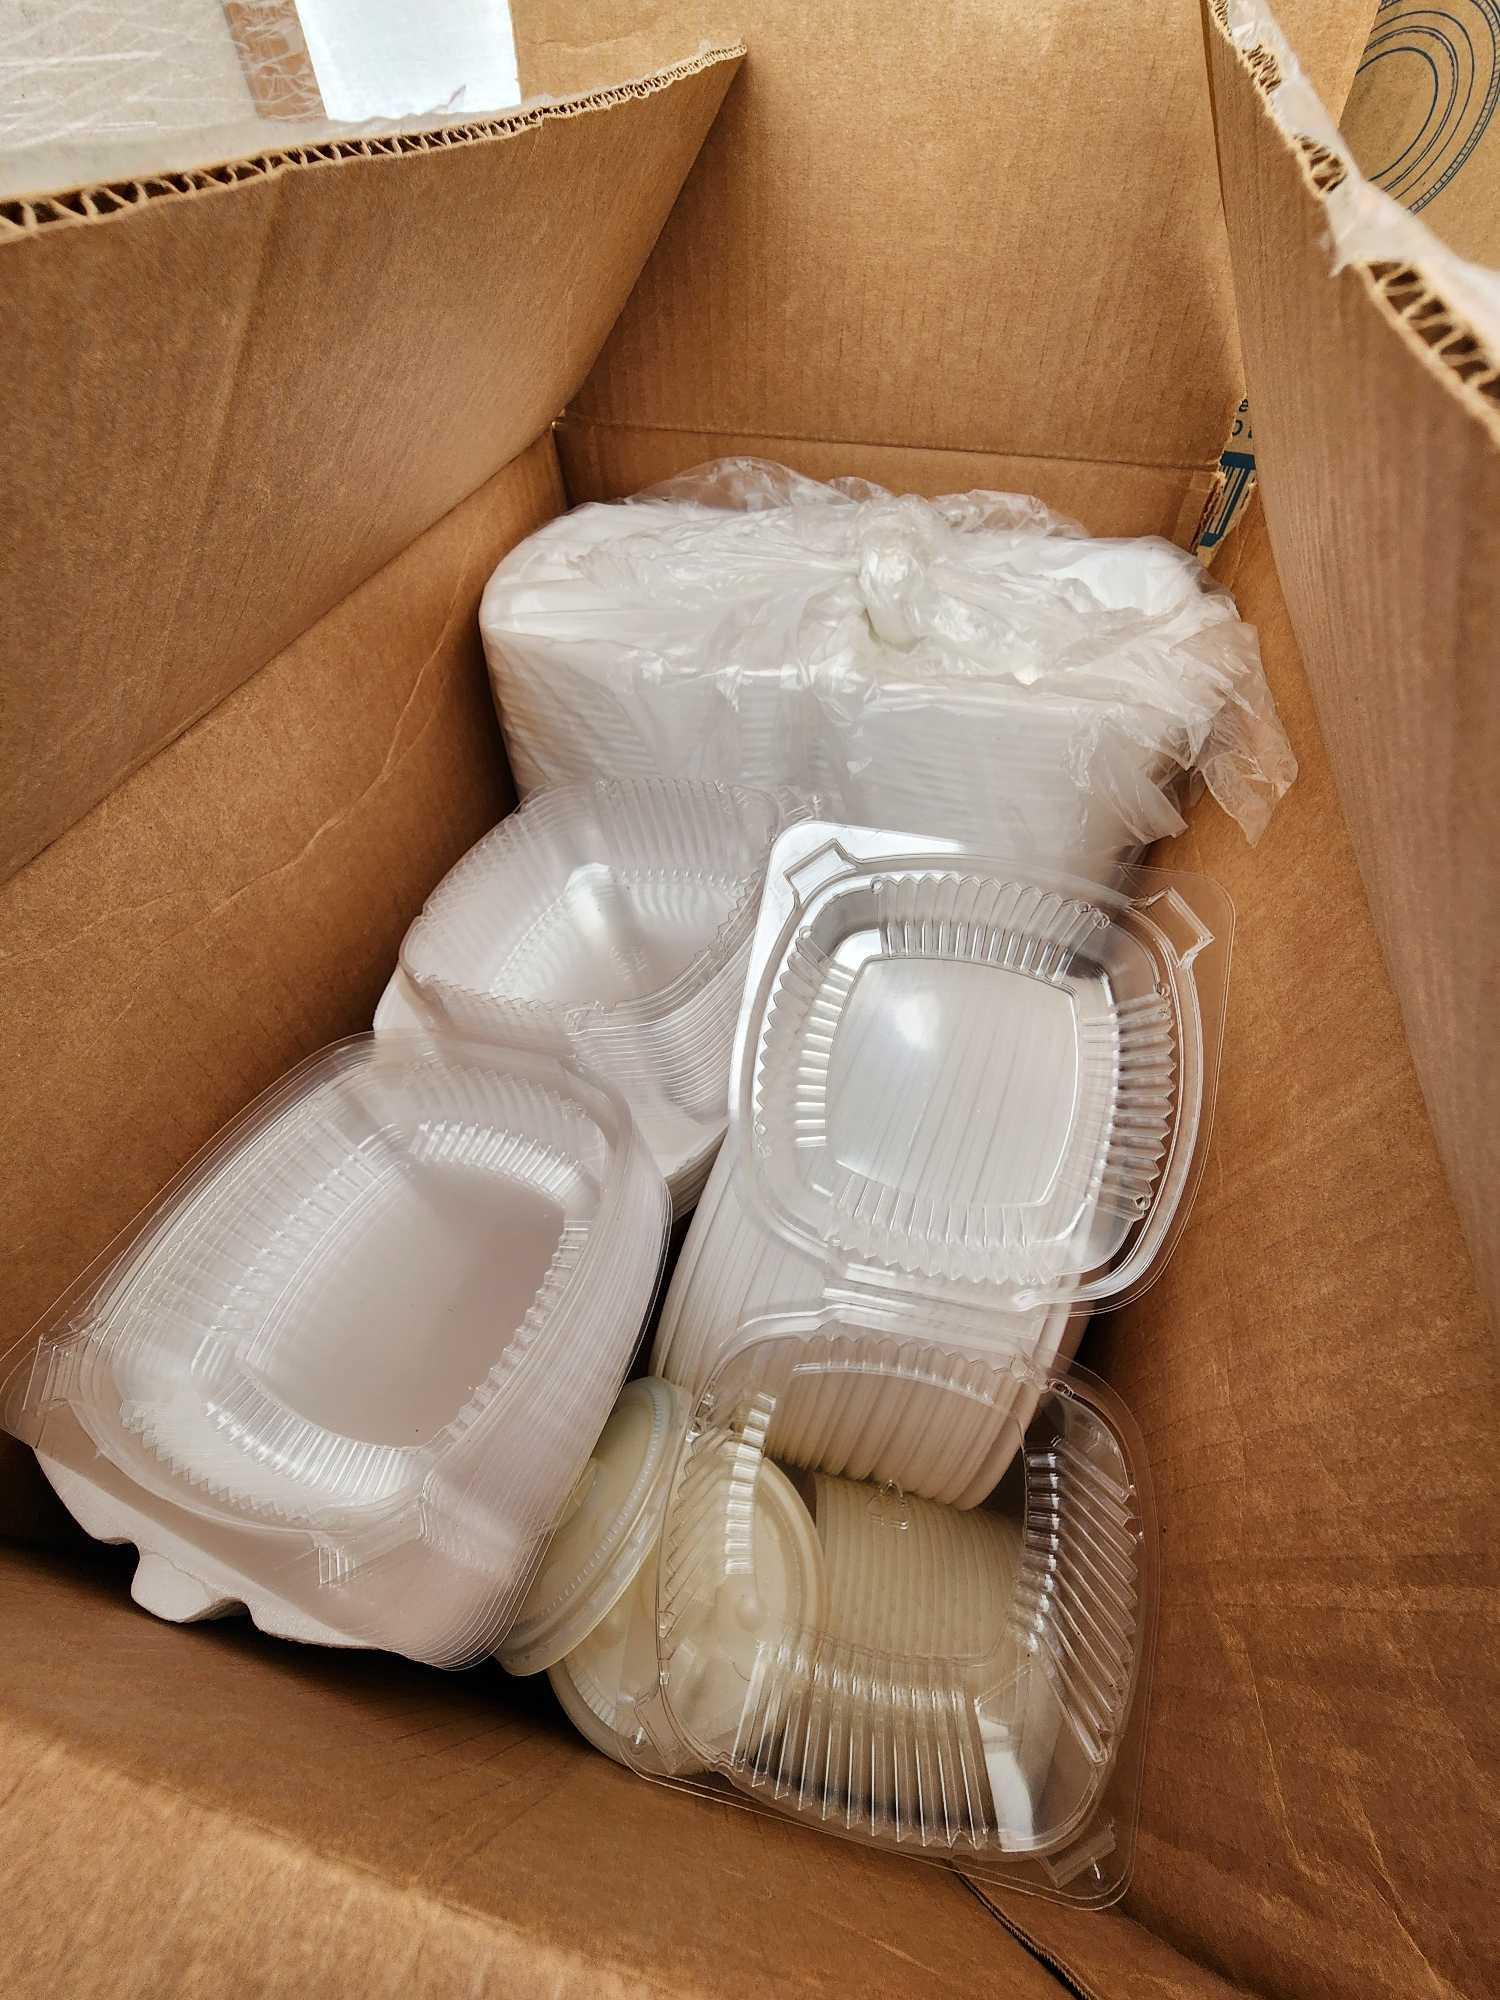 Group of Disposable Food Service Supplies